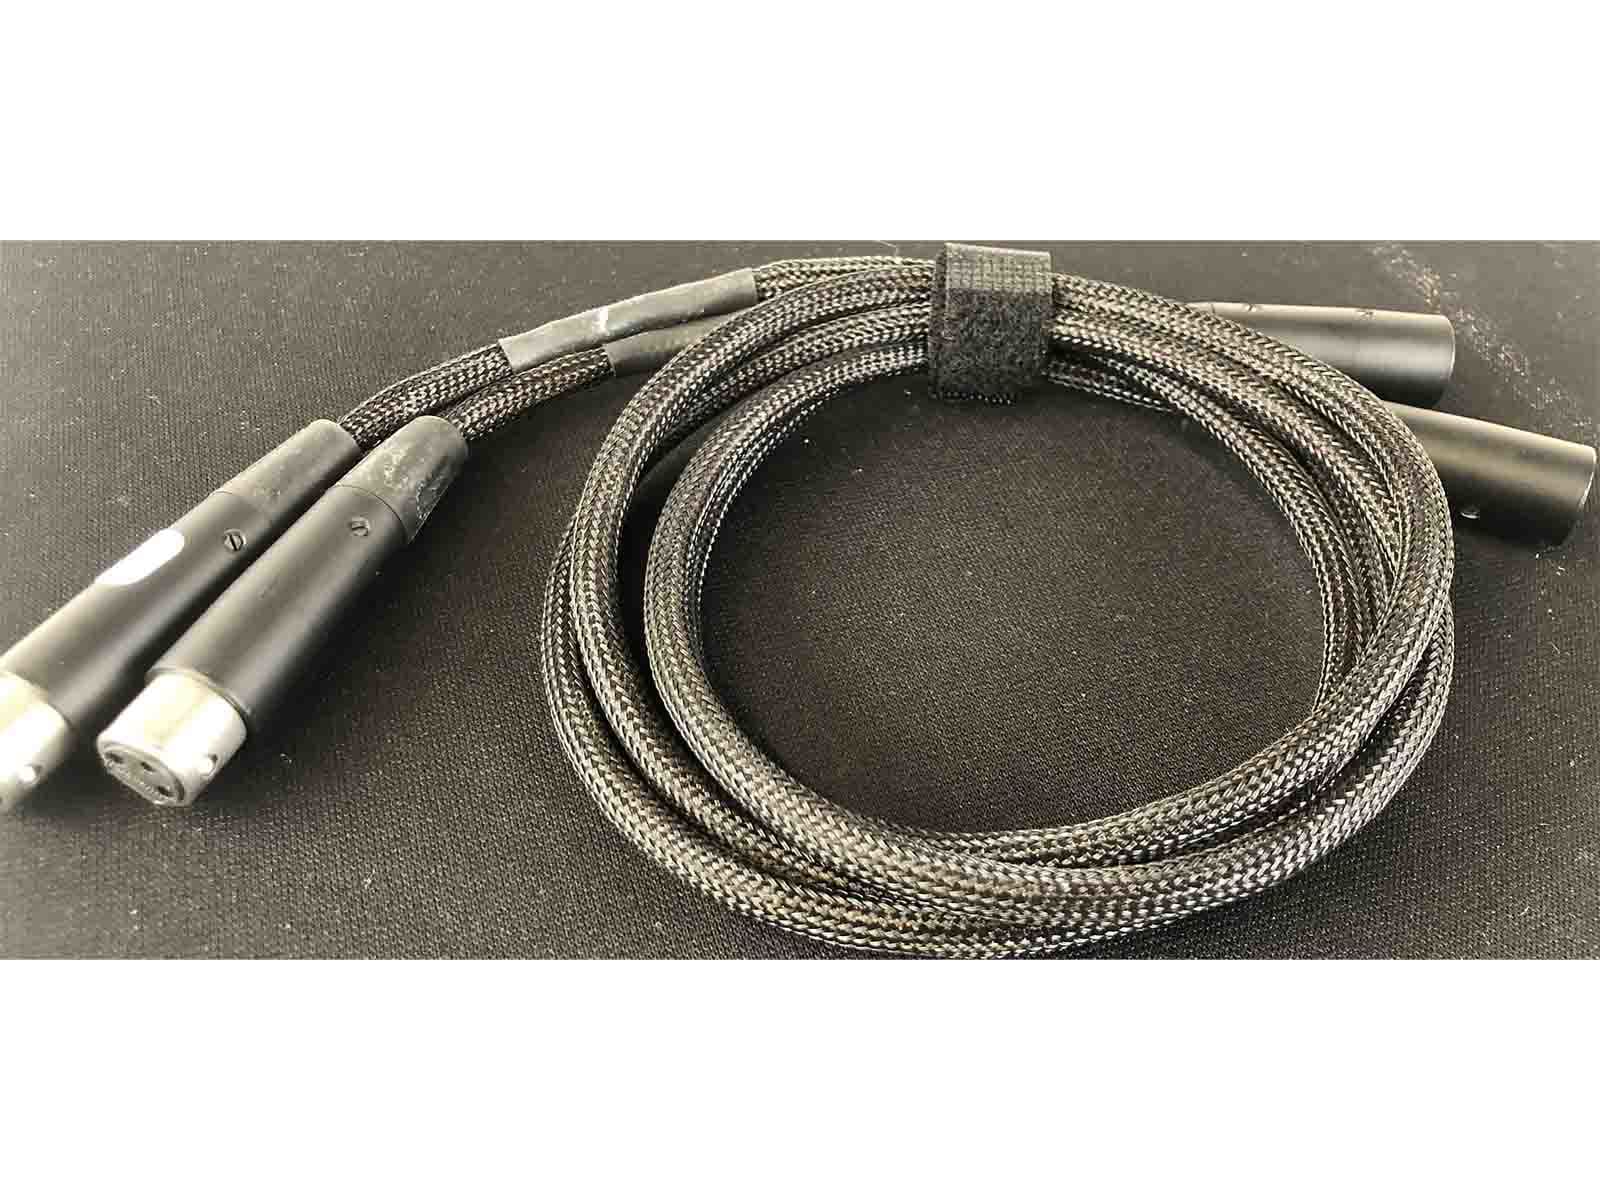 Kimber Kable Ascent Series - Hero XLR Interconnects (Pair) - 1m